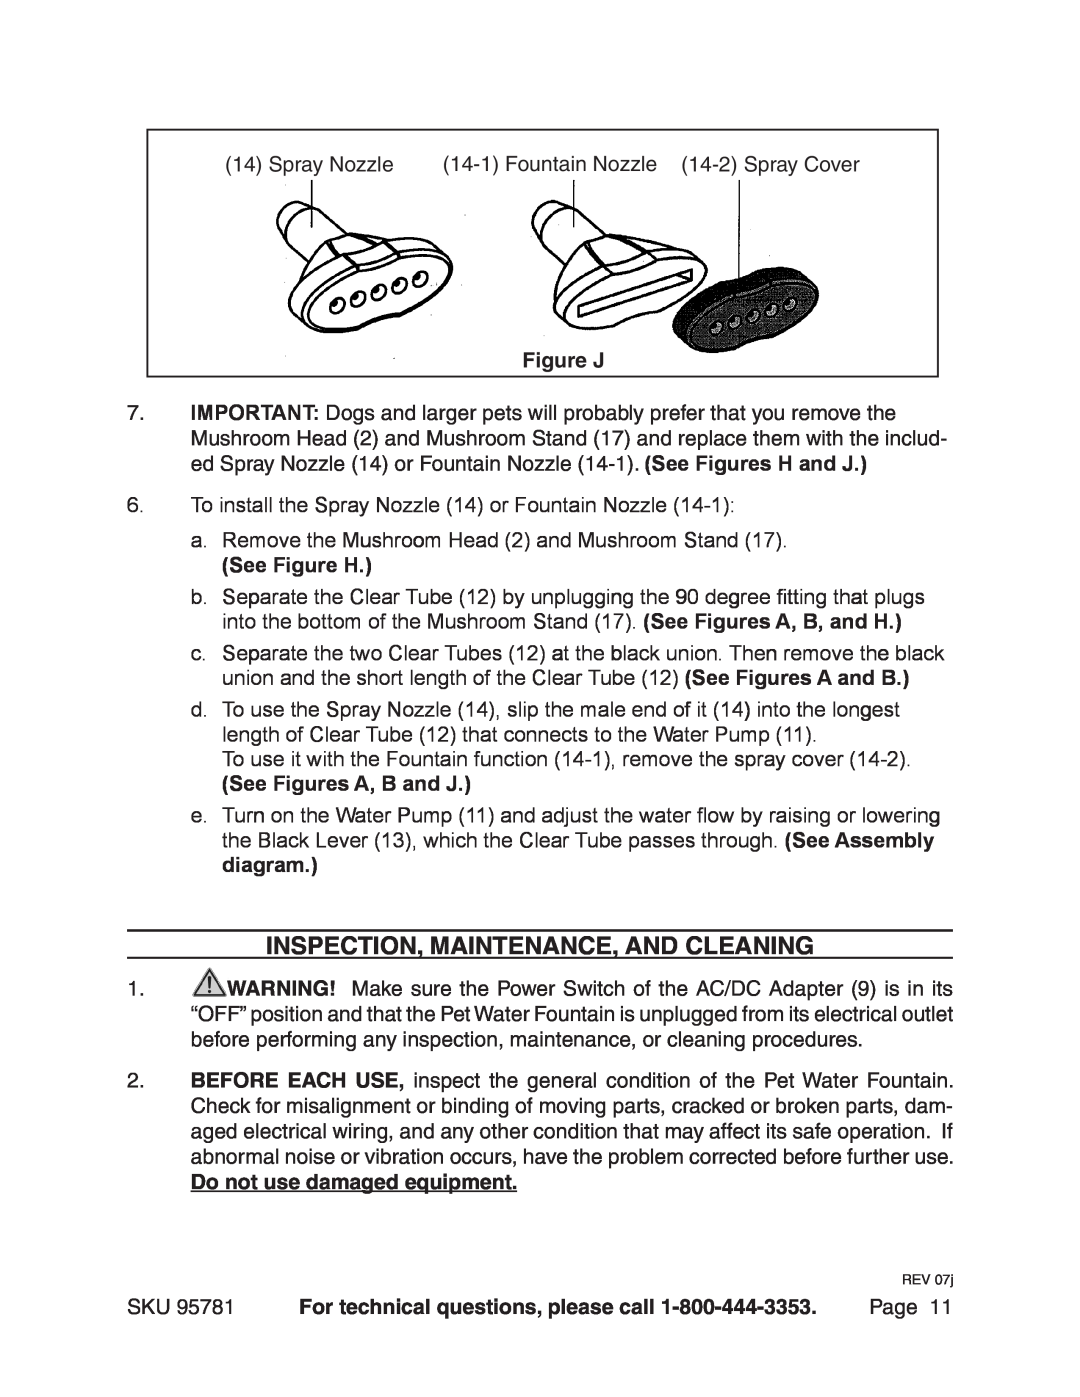 Harbor Freight Tools 95781 manual Inspection, Maintenance, And Cleaning, Figure J FIGURE J, Do not use damaged equipment 